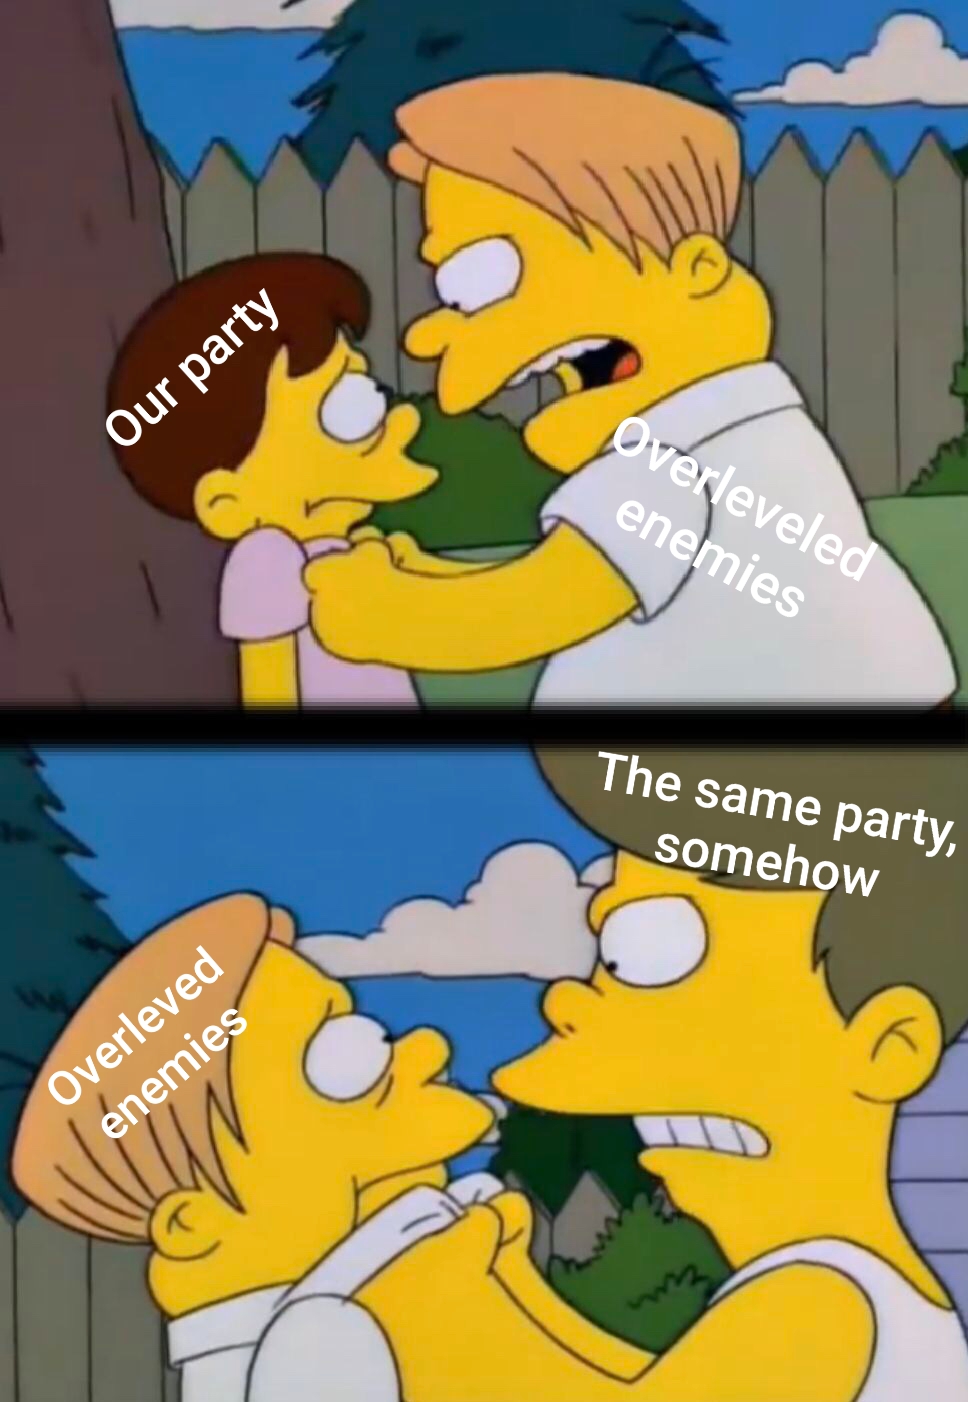 steve irwin peta meme - Our party Overleveled enemies The same party somehow Overleved enemies